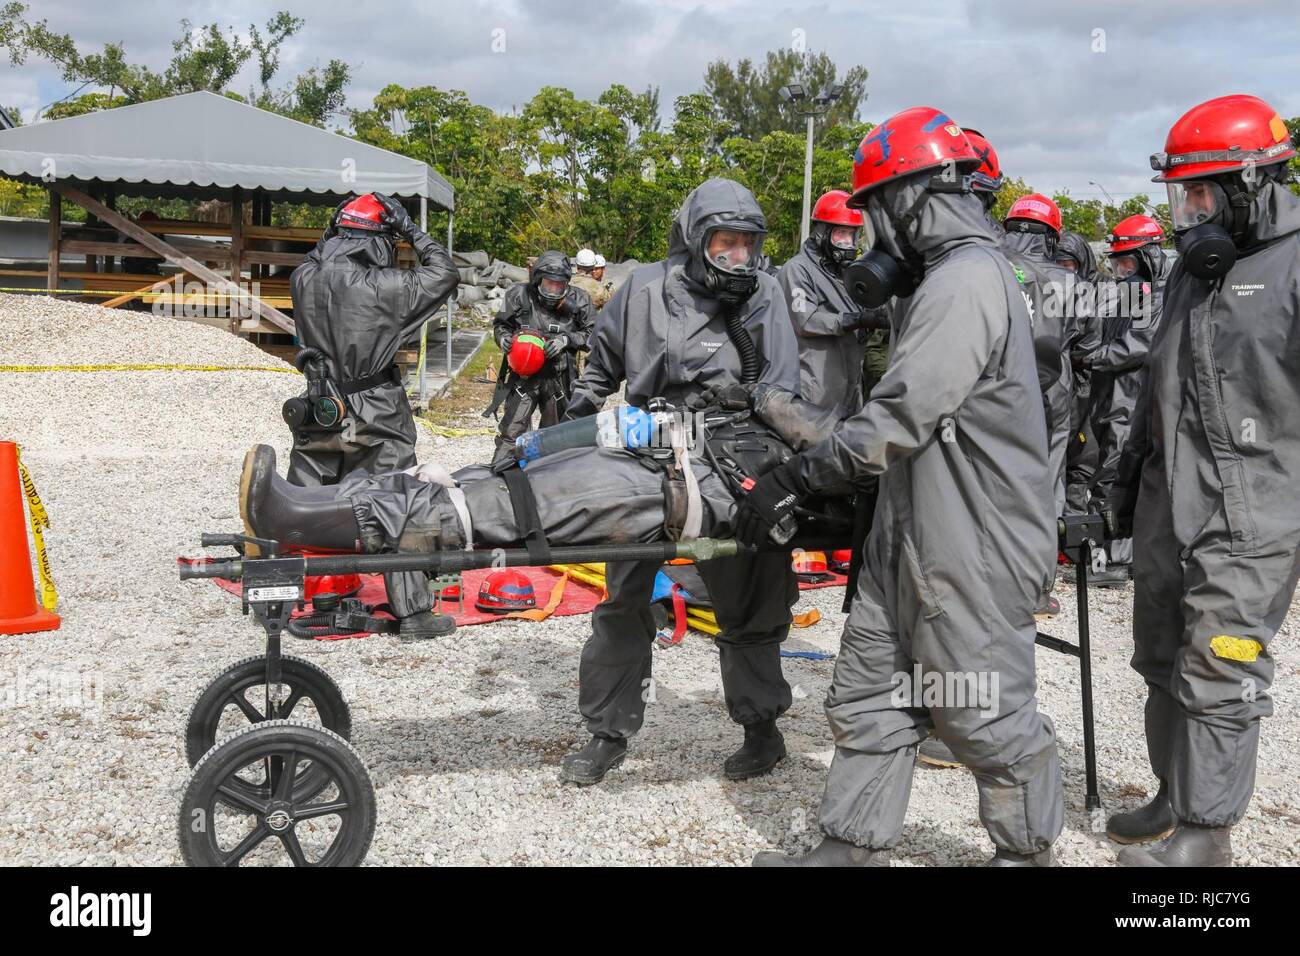 U. S. Army Reserve Soldiers assigned to 468th engineer detachment transports casualties in a Joint Training Exercise on Miami- Dade Fire Rescue Urban Search and Rescue Training Site in Miami, Fla. Jan. 09, 2018. This JTE focused on building response capabilities and seamless transition between the local first responders and the follow-on support provided by the National Guard and Active duty soldiers. (U. S. Army Stock Photo